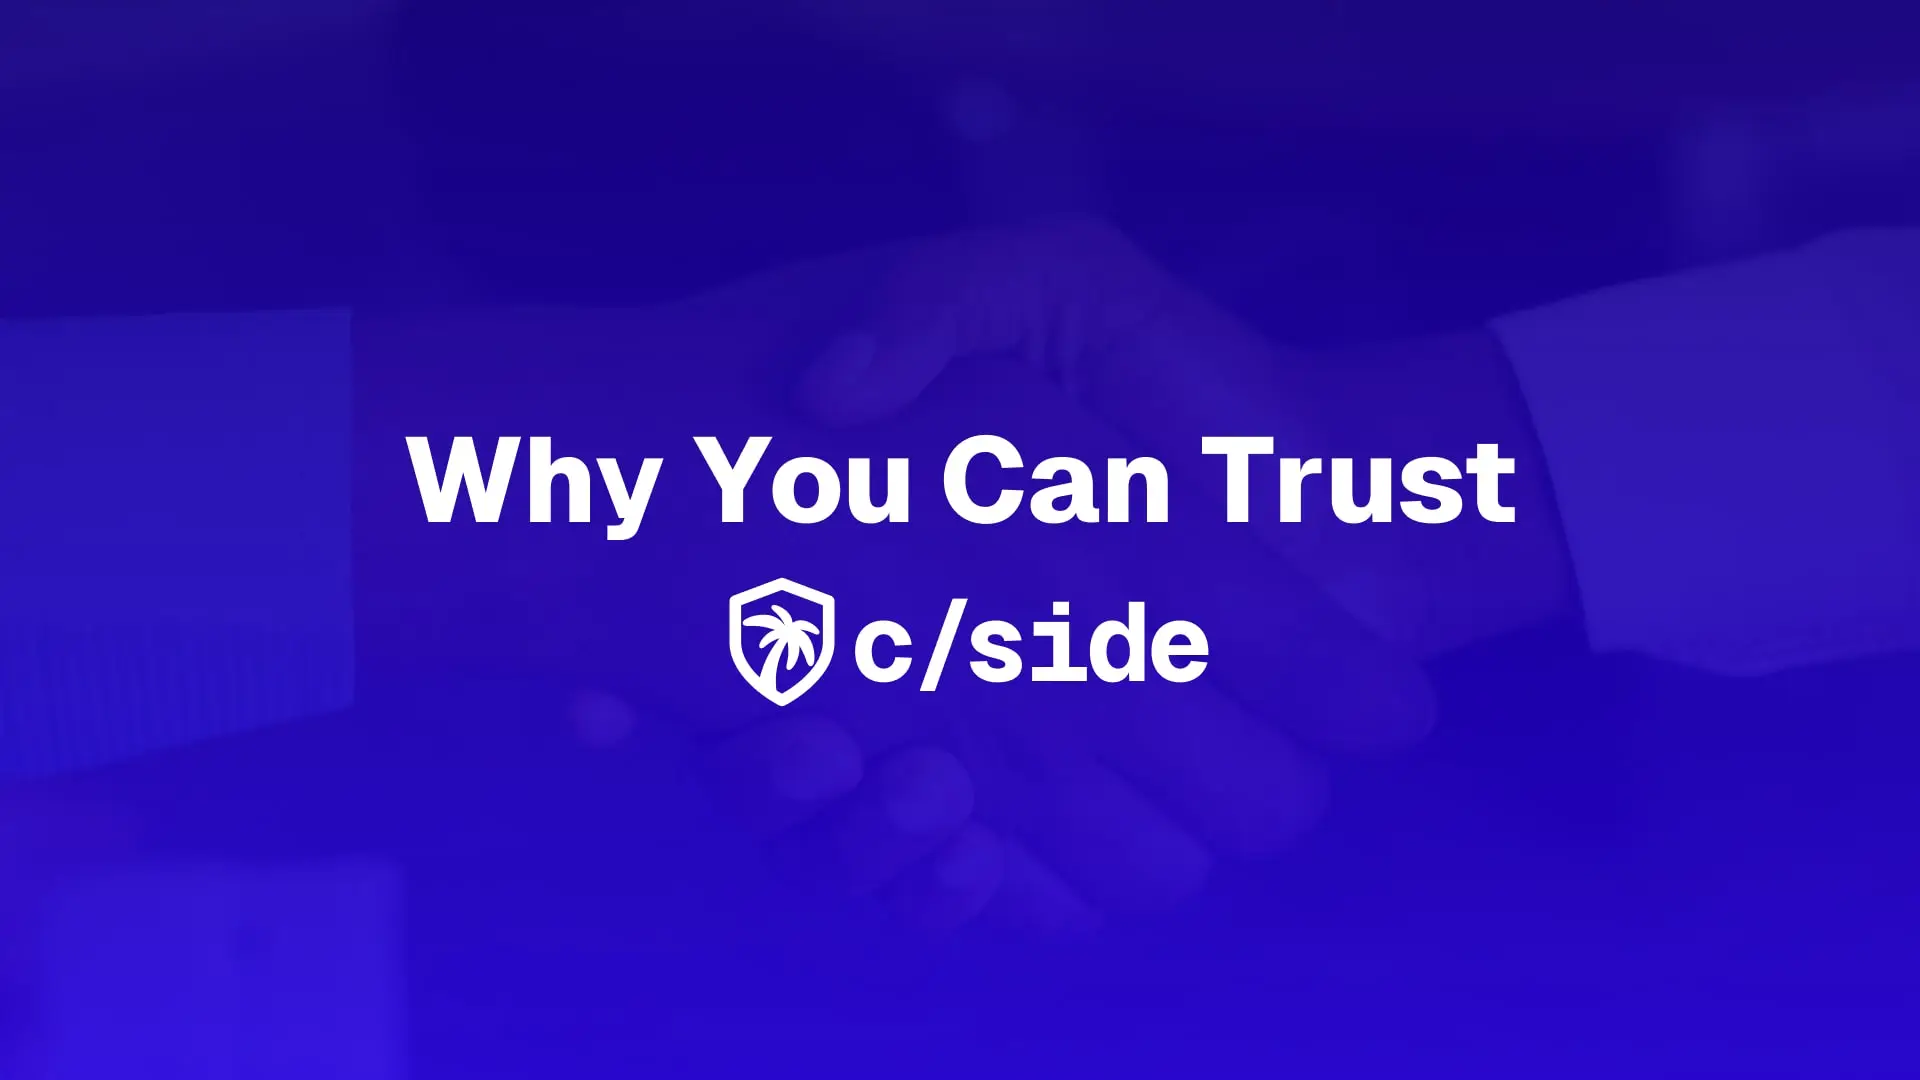 The text Why You Can Trust with the c/side logo, on a blue background with two people shaking hands behind that